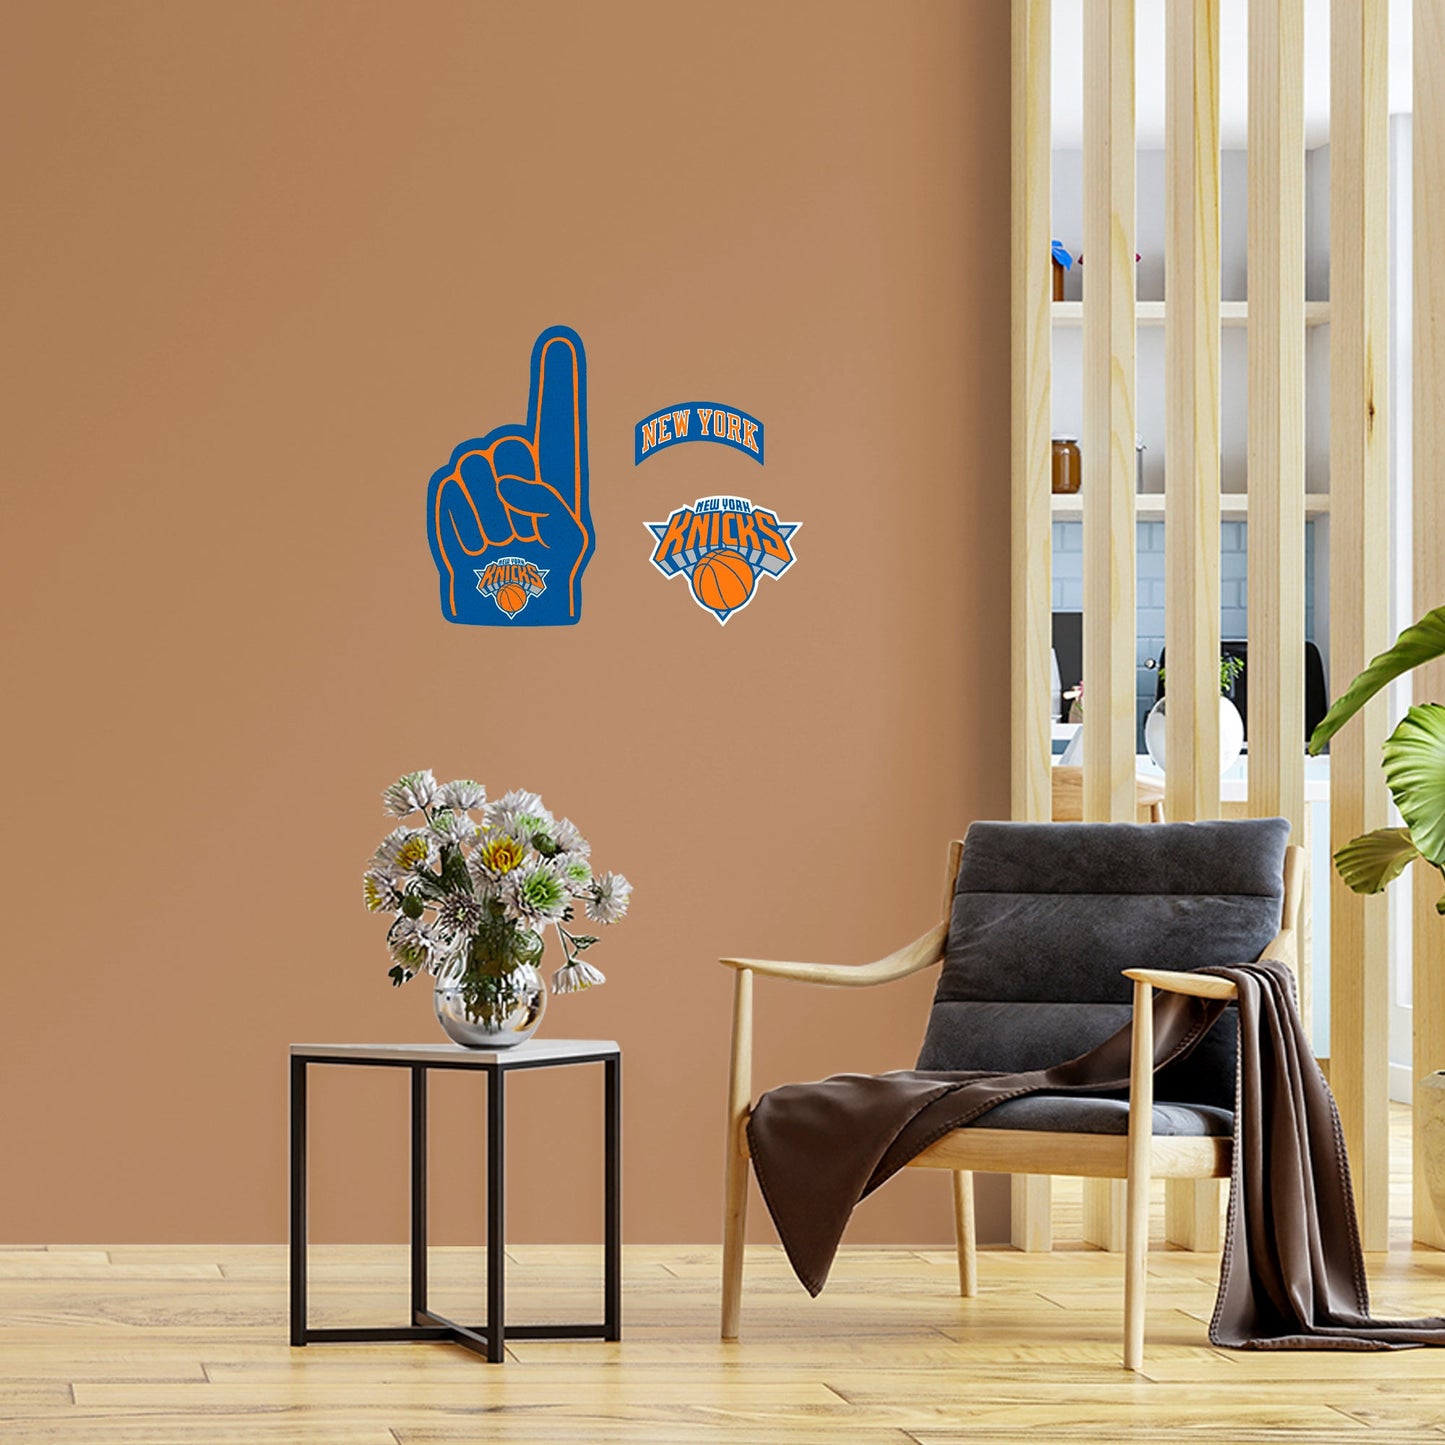 New York Knicks: Foam Finger - Officially Licensed NBA Removable Adhesive Decal